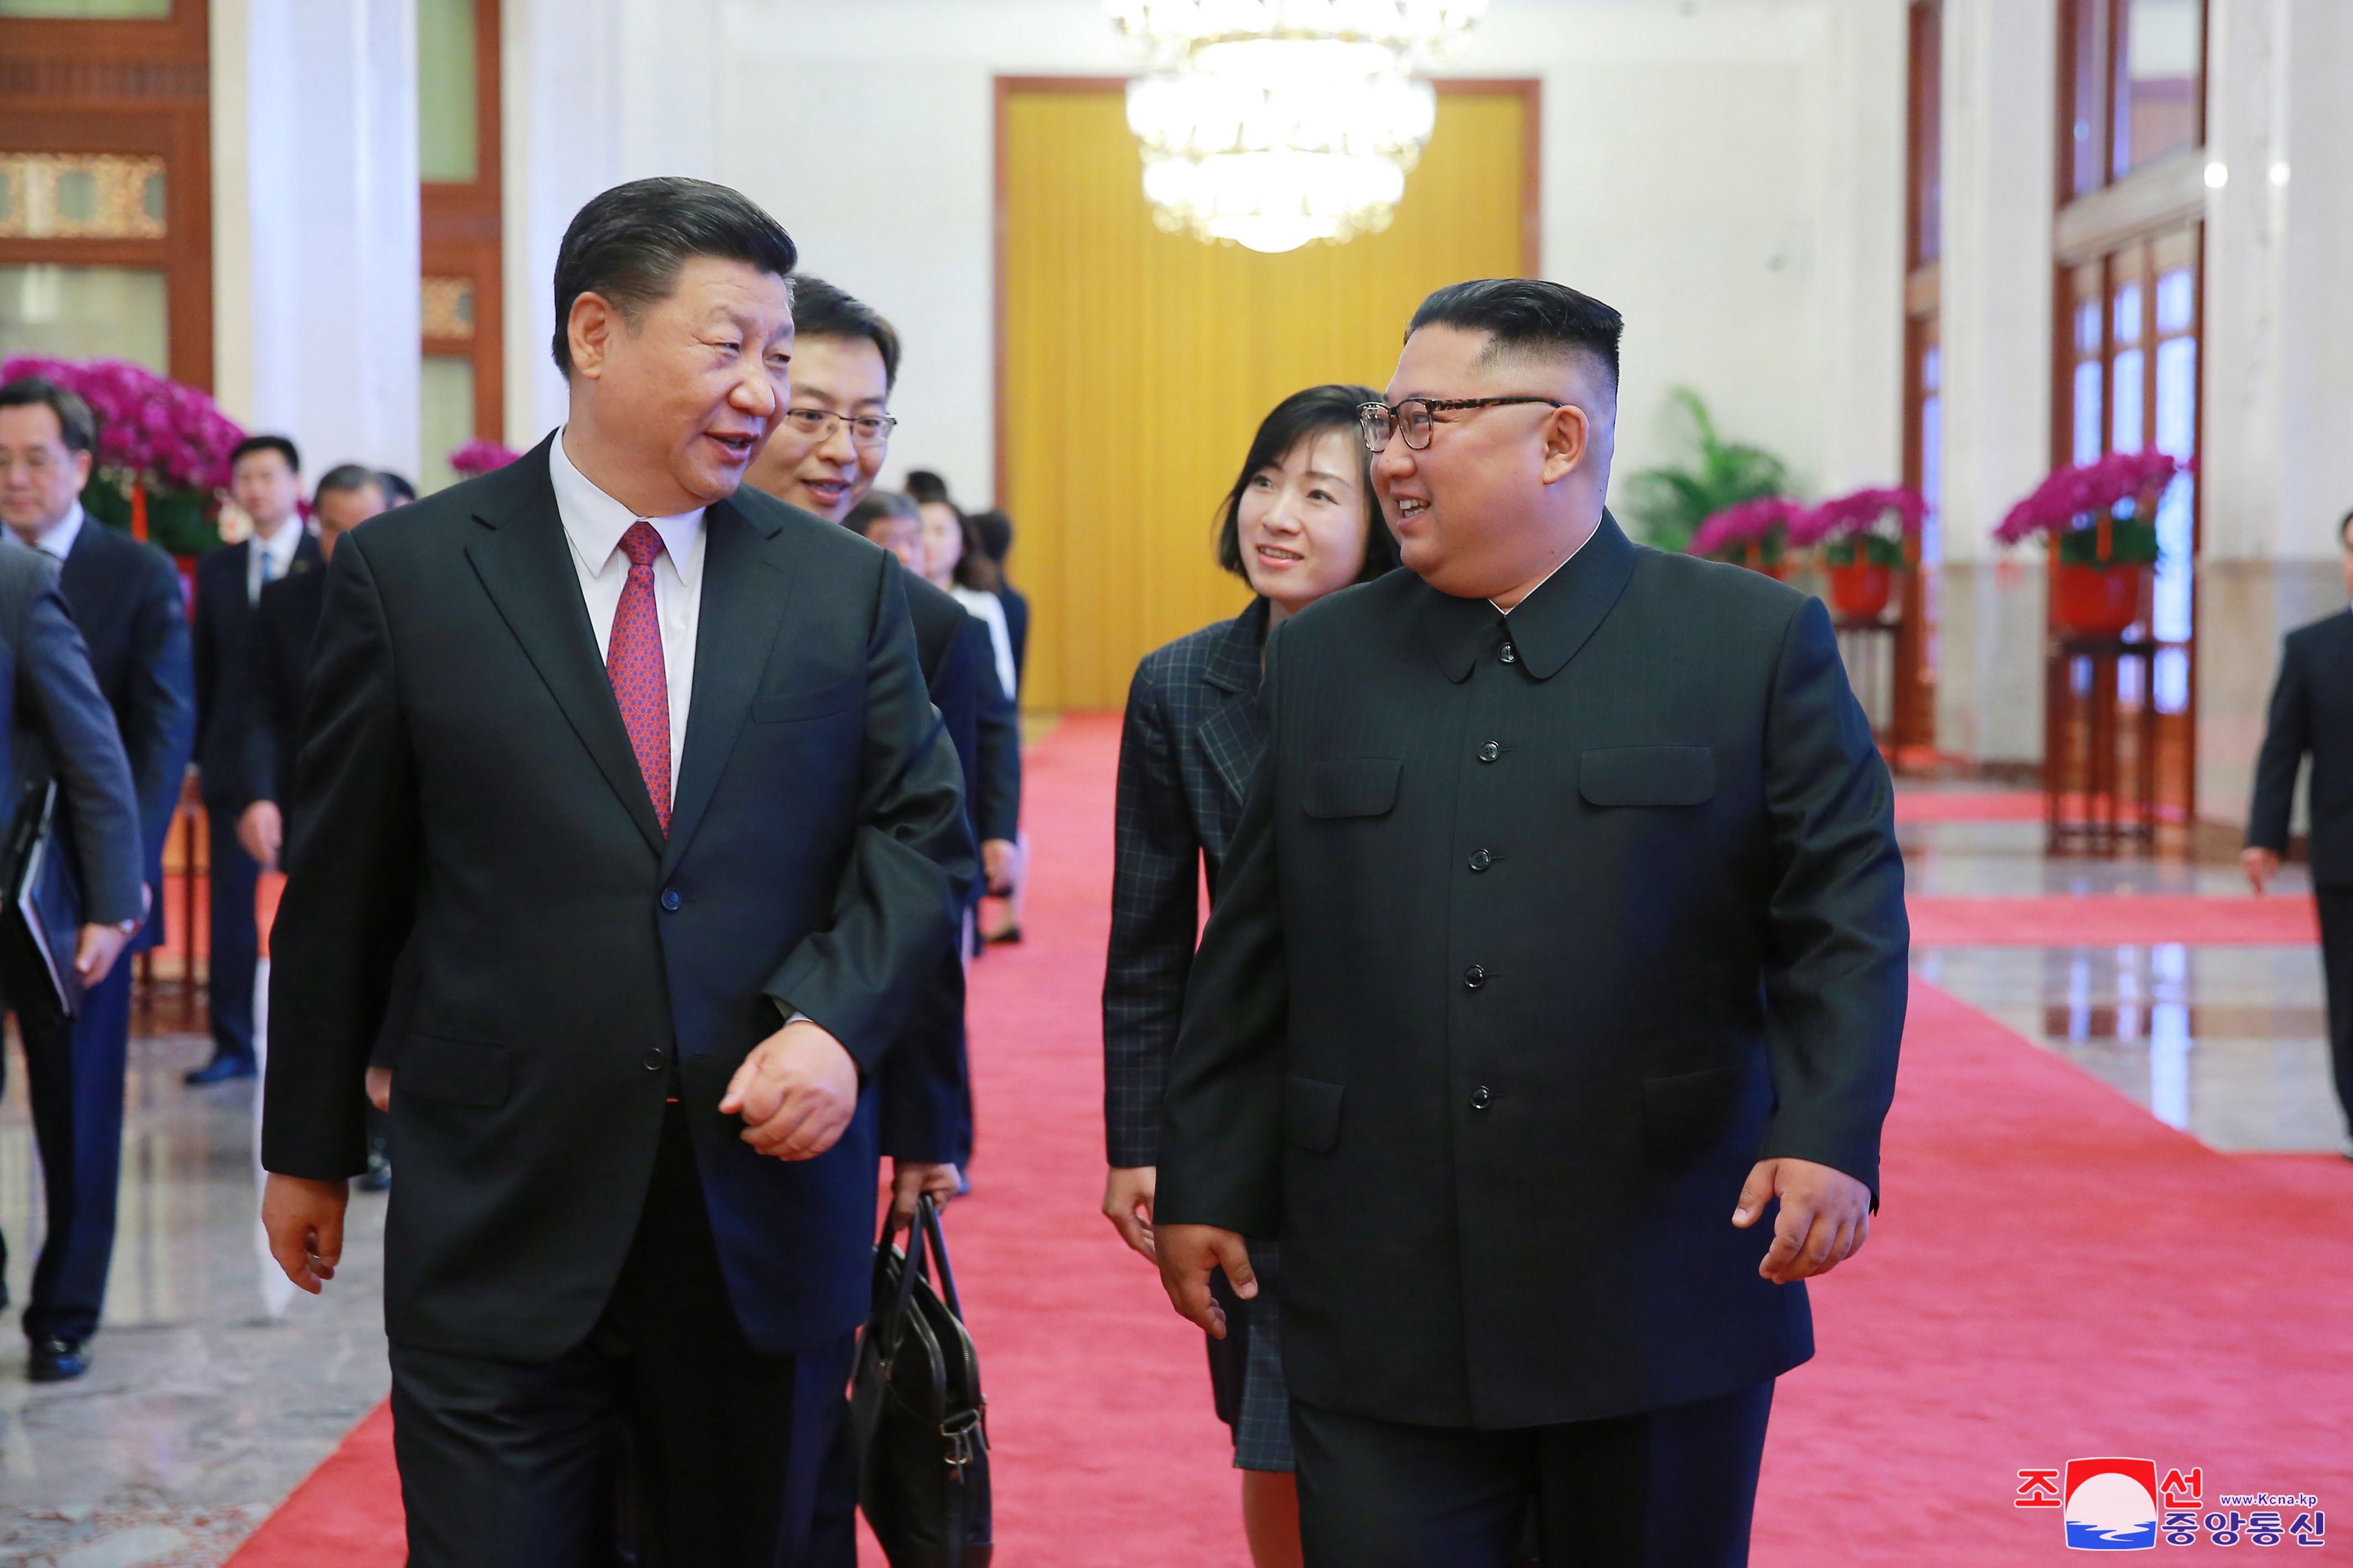 Chinese President Xi Jinping and North Korean leader Kim Jong-un chat during a meeting in Beijing in June 2018. Photo: EPA-EFE